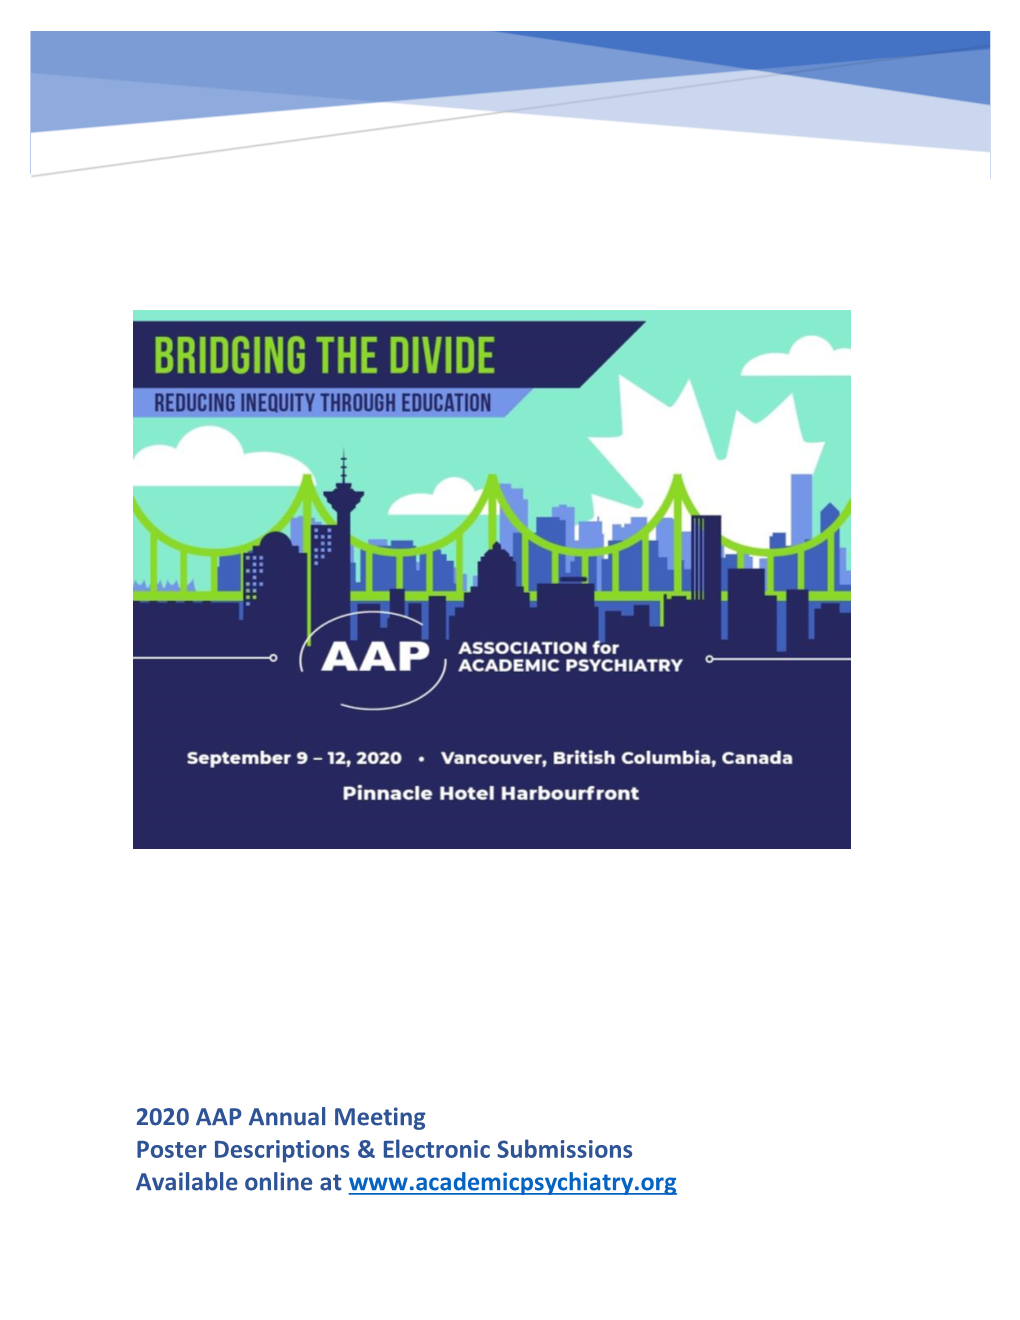 2020 AAP Annual Meeting Poster Descriptions & Electronic